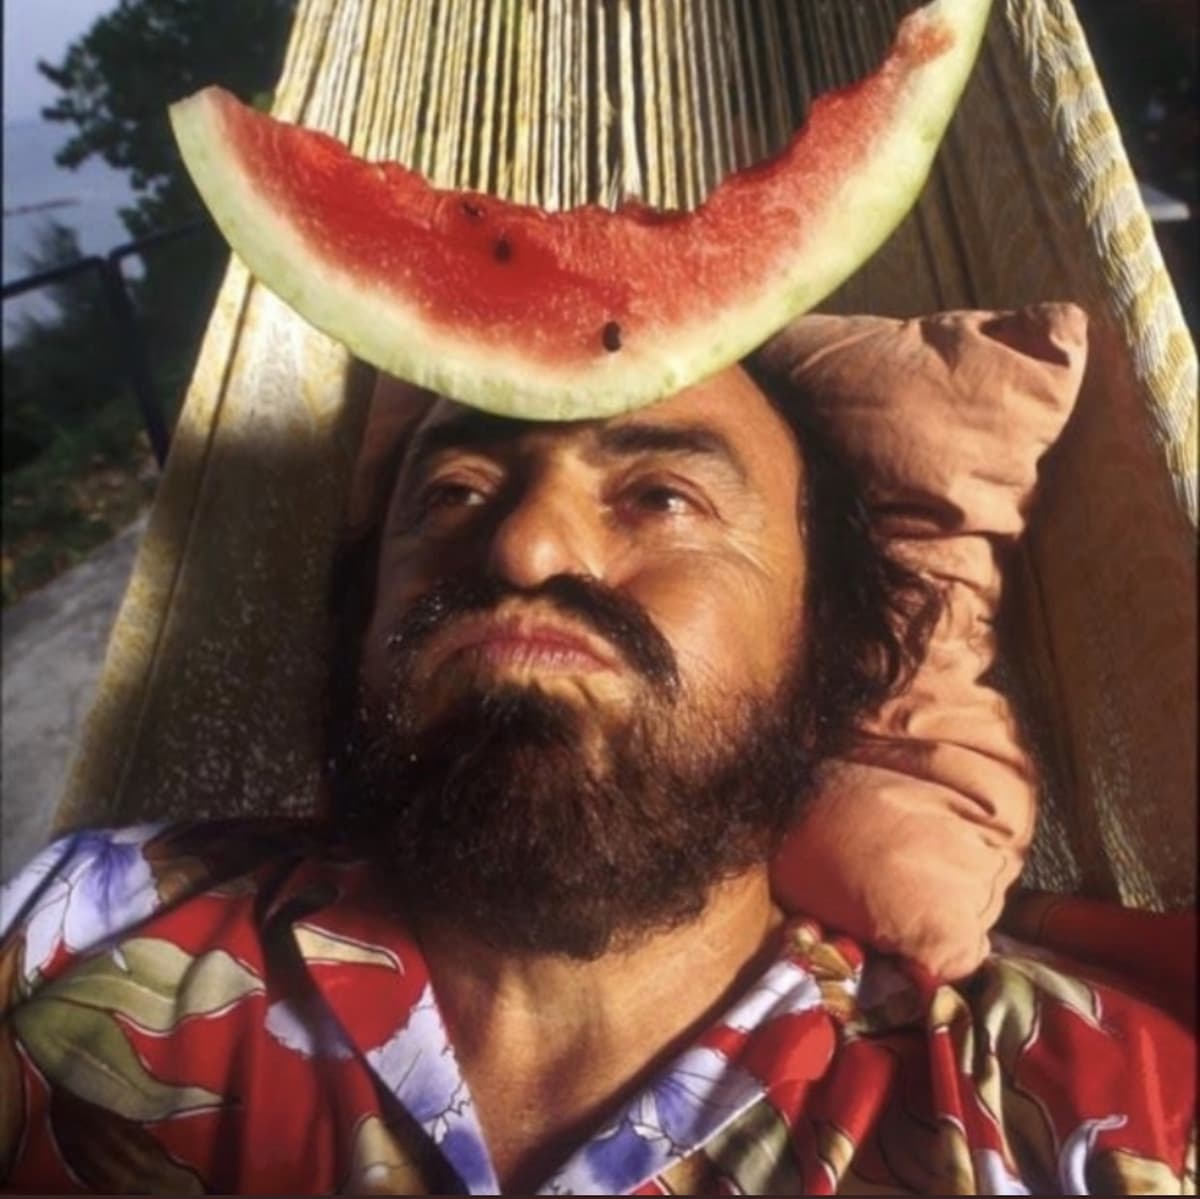 Luciano Pavarotti taking funny picture with watermelon